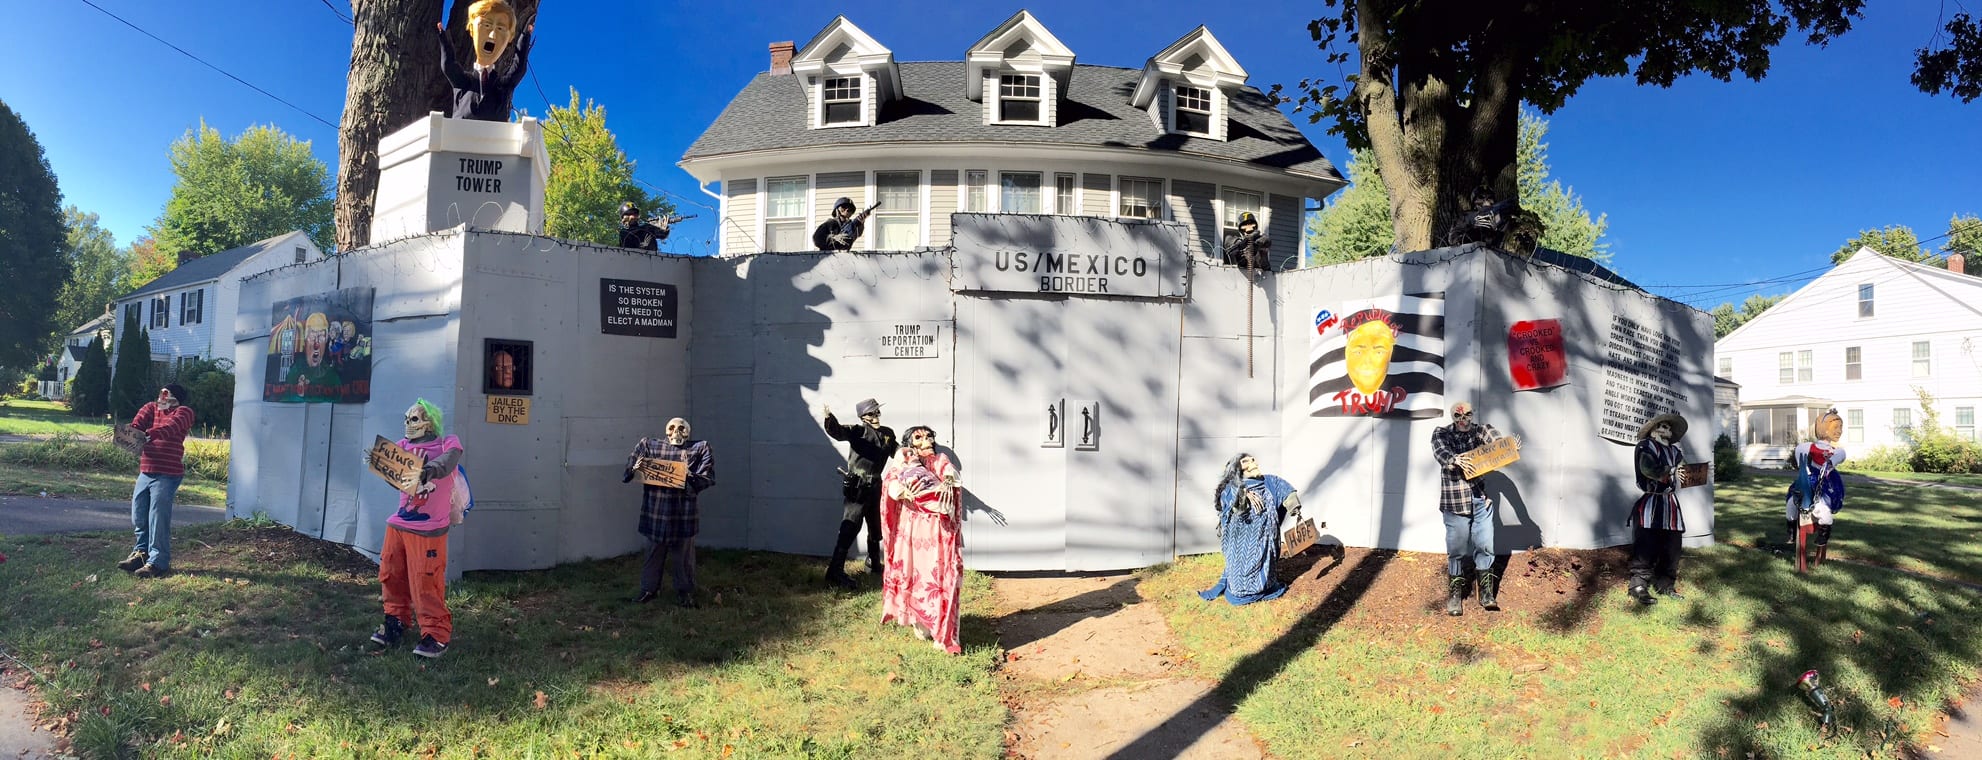 The entire scene in front of Matt Warshauer's North Main Street home is difficult to see in one glance. (Panorama image by Ronni Newton)